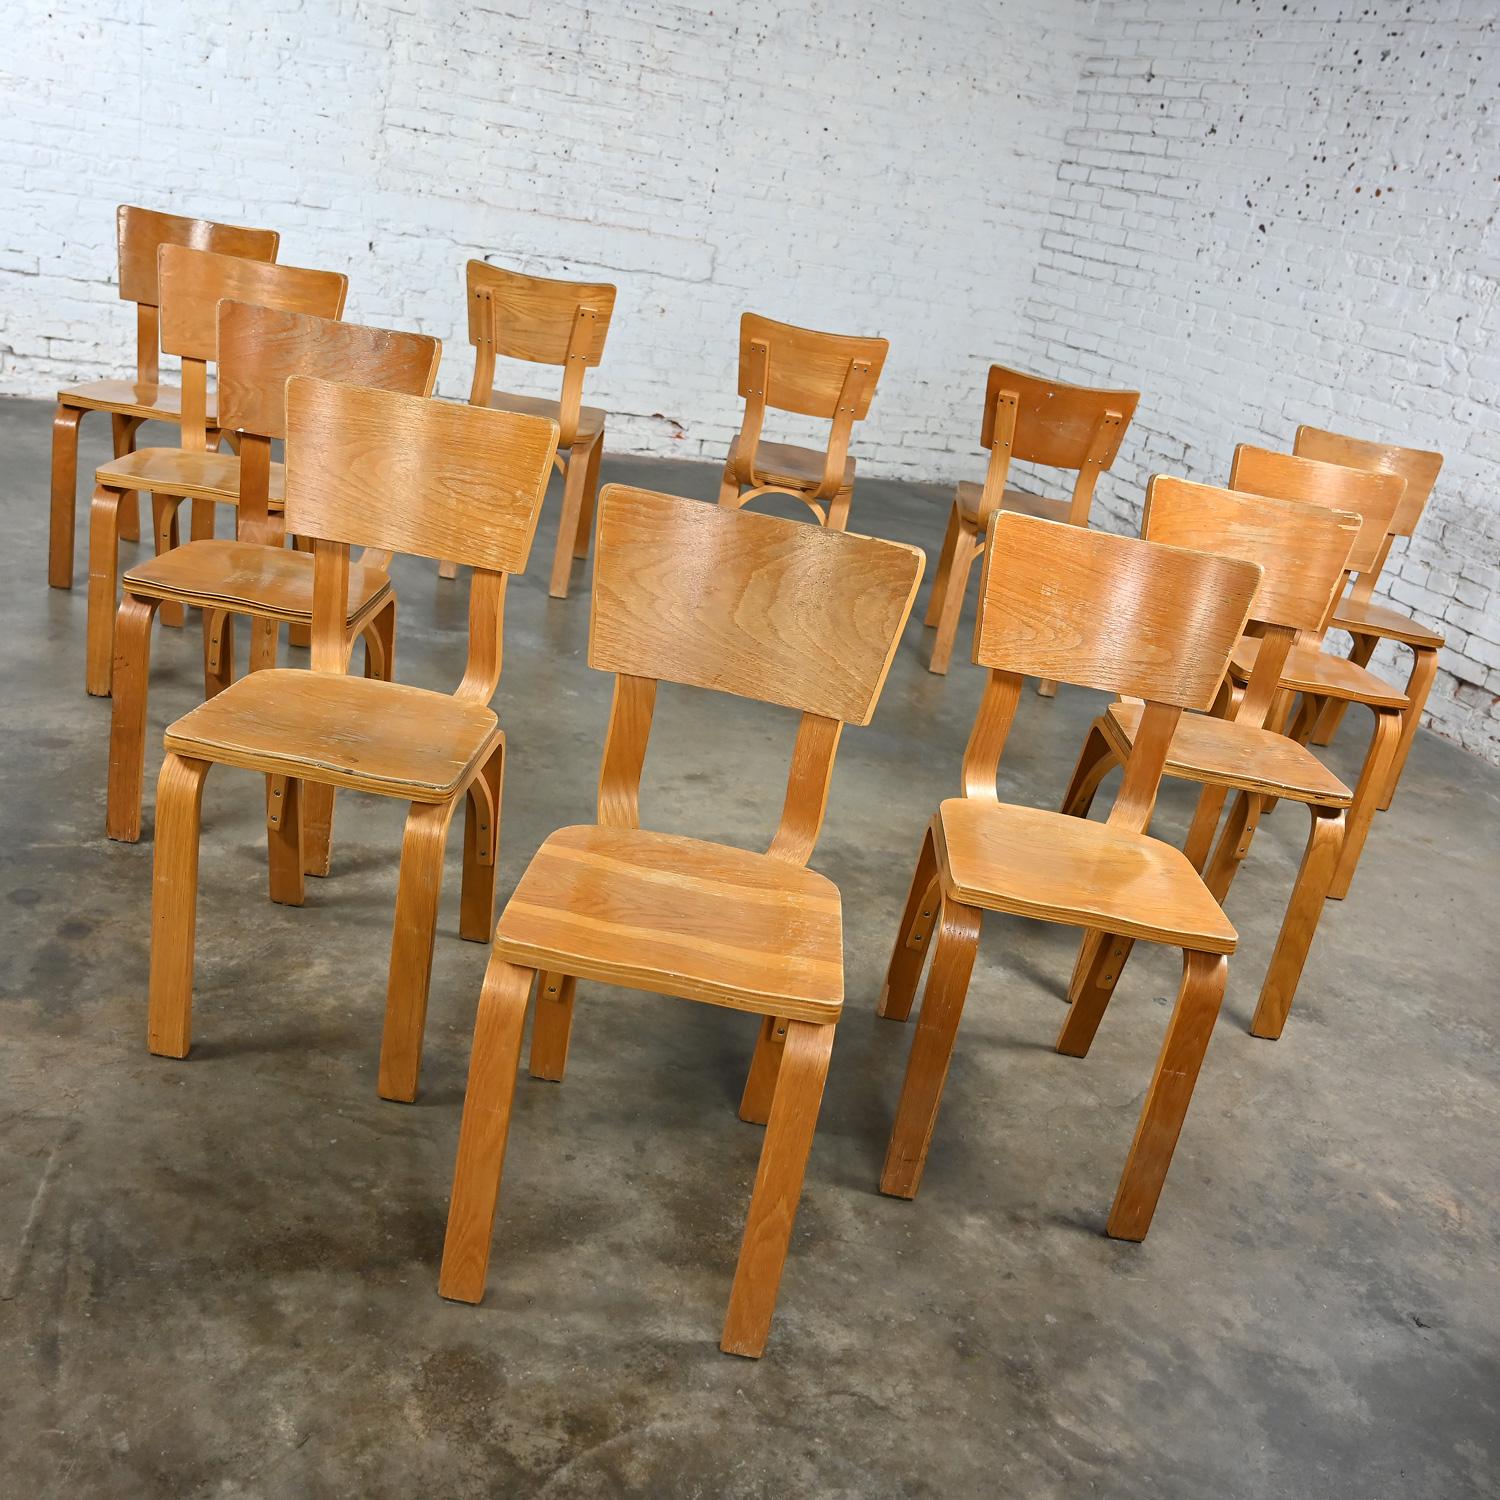 Marvelous vintage Mid-Century Modern Thonet #1216-S17-B1 dining chairs comprised of bent oak plywood with saddle seats and a single bow back stretcher, set of 12. Beautiful condition, keeping in mind that these are vintage and not new so will have